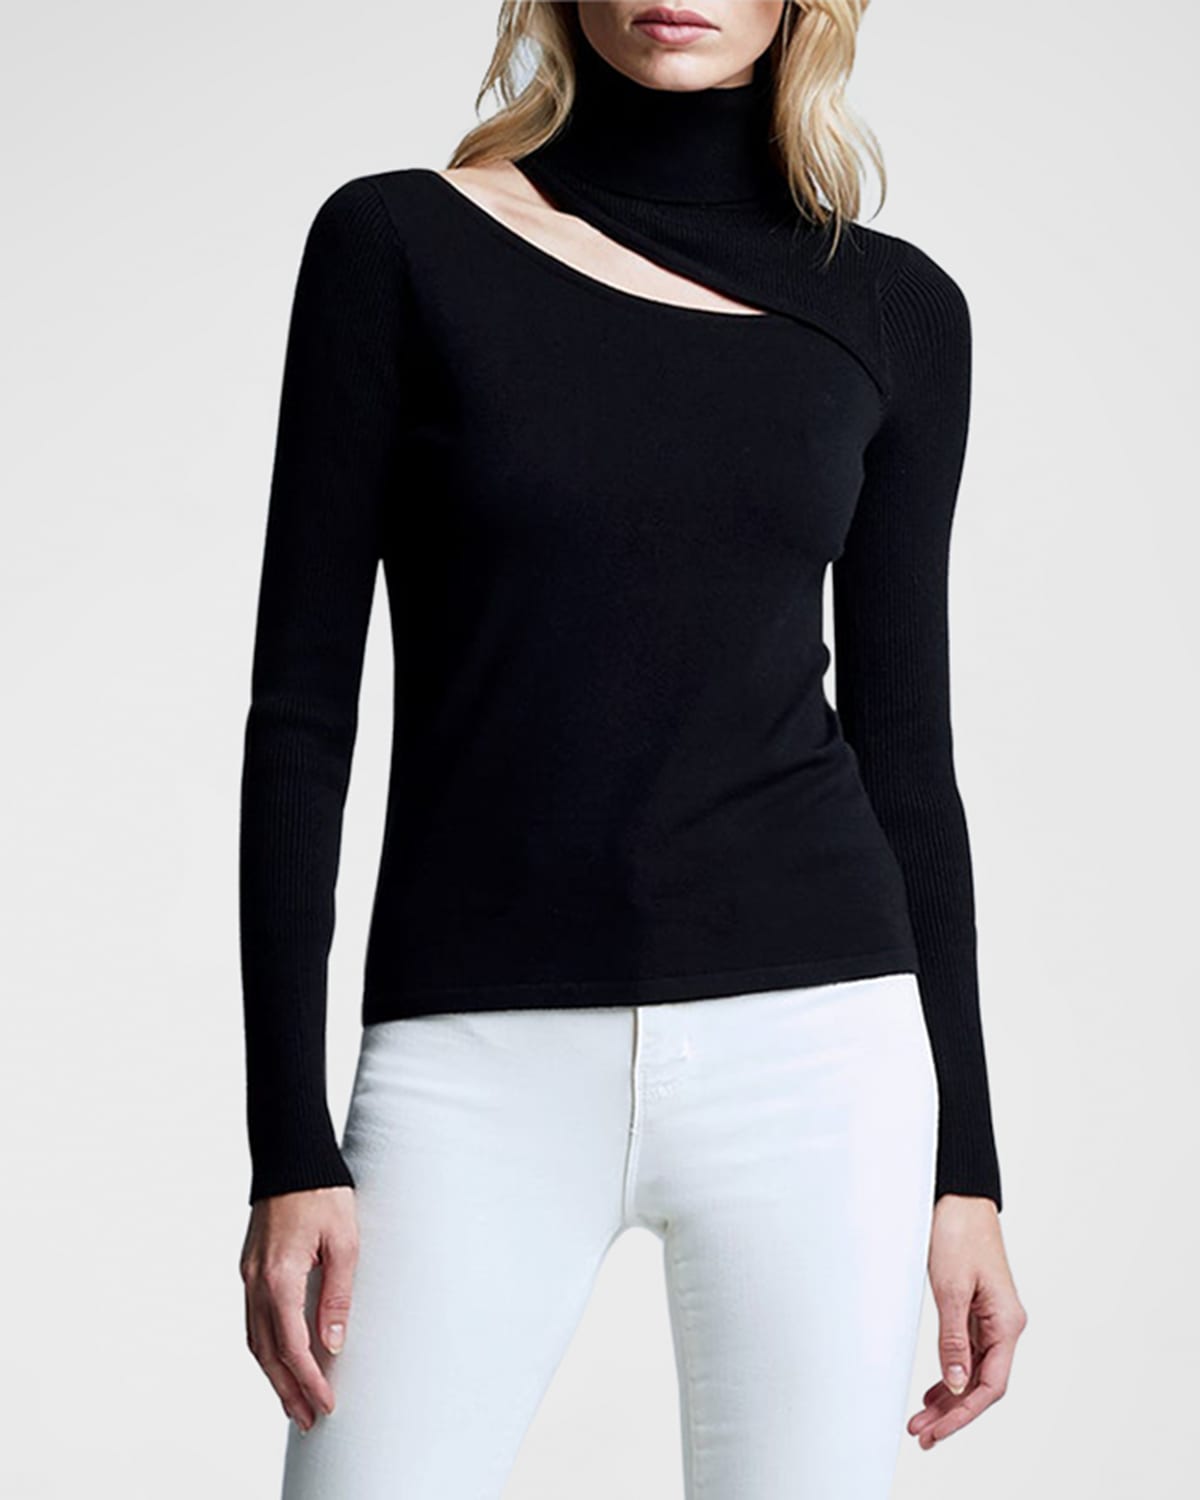 L'Agence Everlee Cutout Sweater